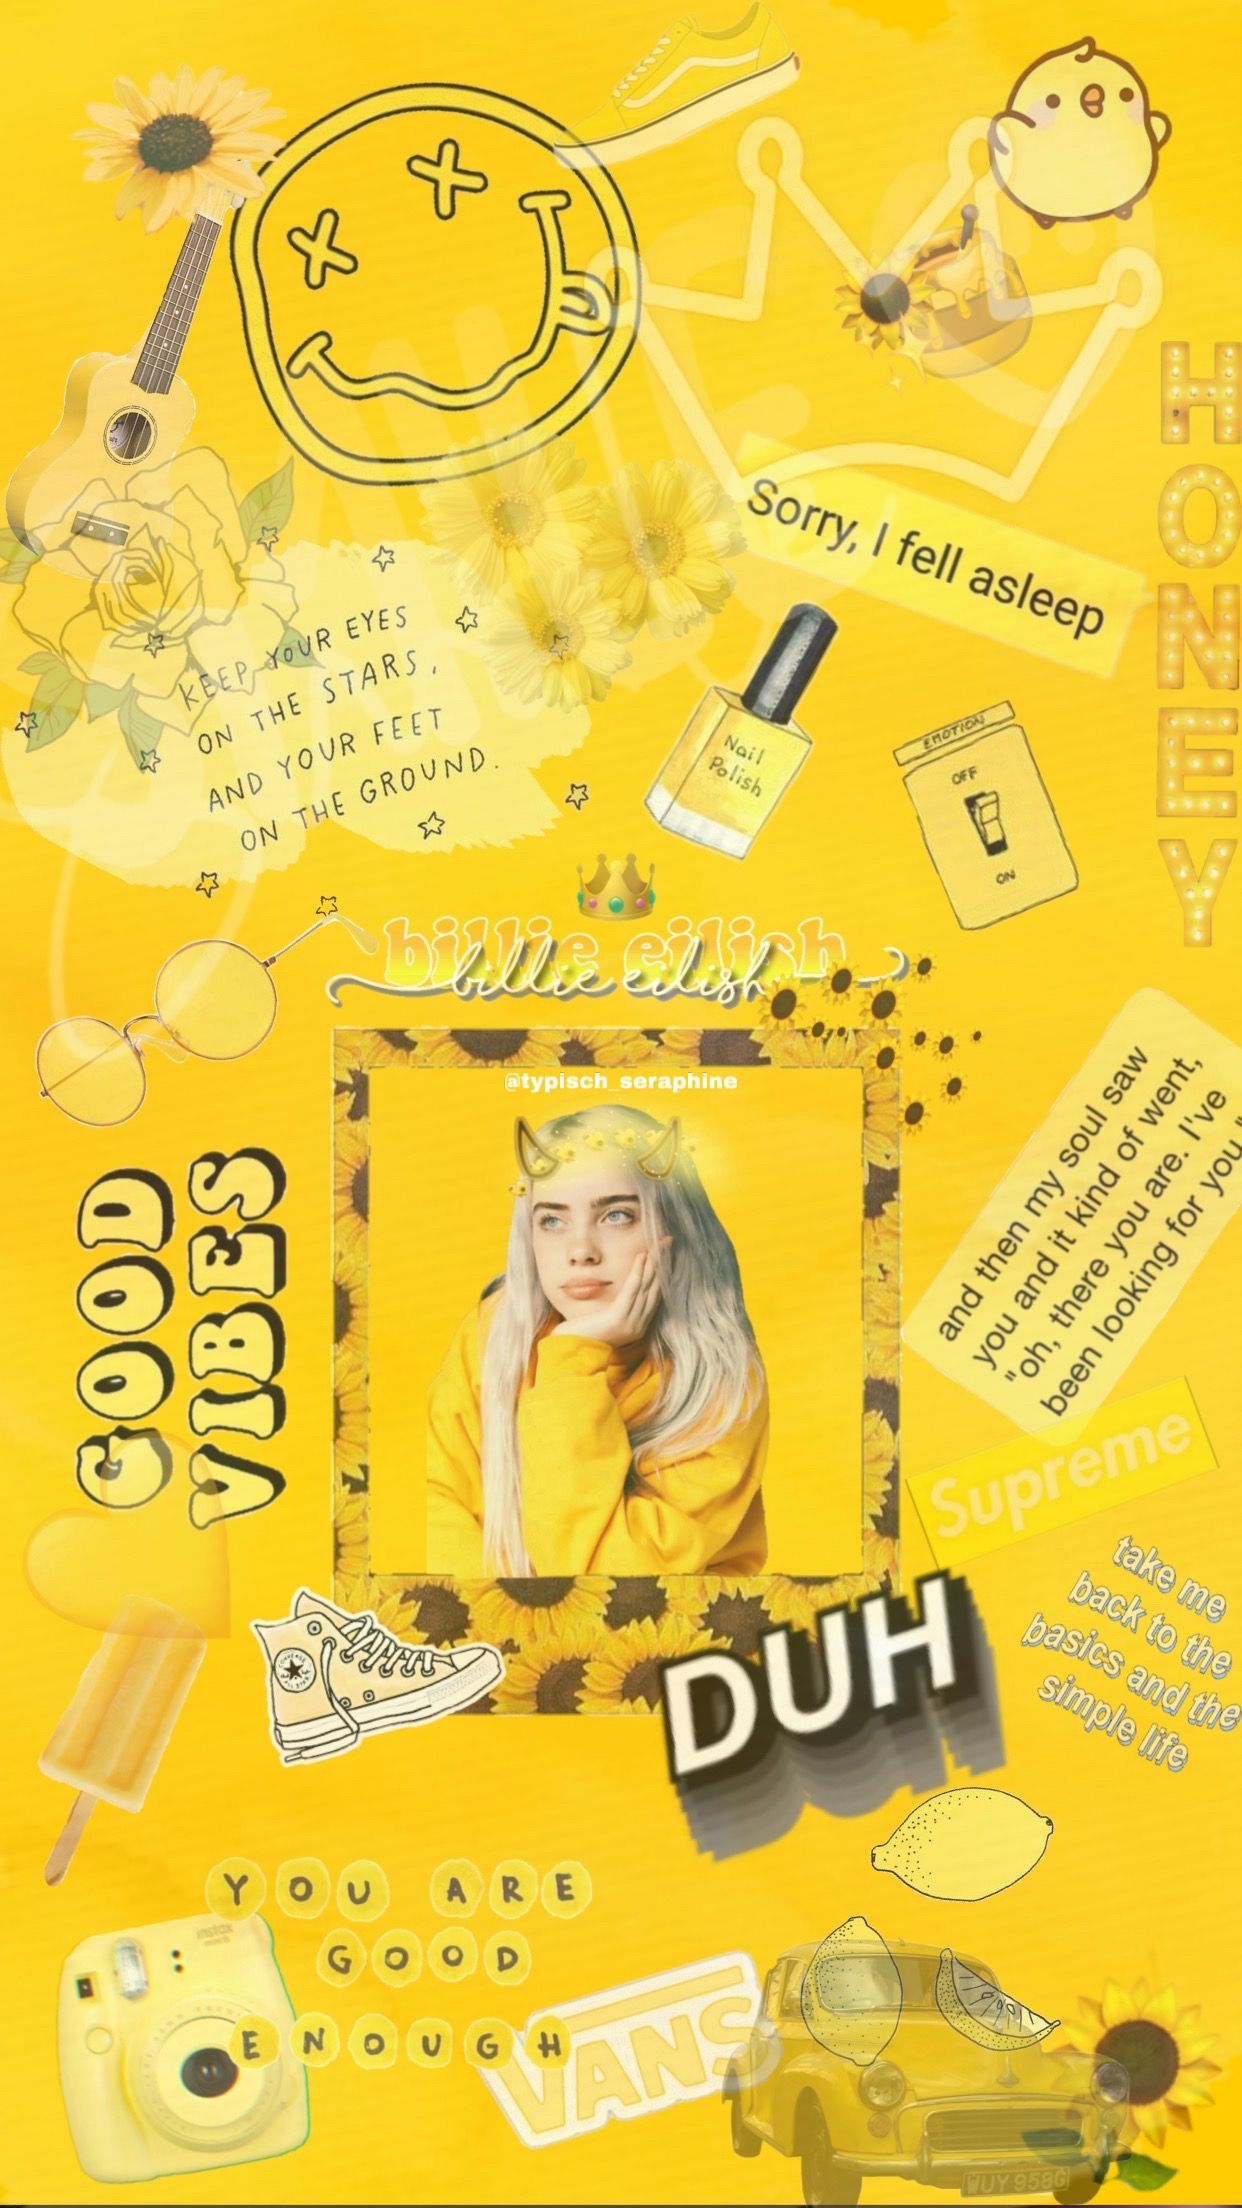 Aesthetic Billie Eilish wallpaper made by me! Credit to the rightful owners of the pictures used - Yellow iphone, Billie Eilish